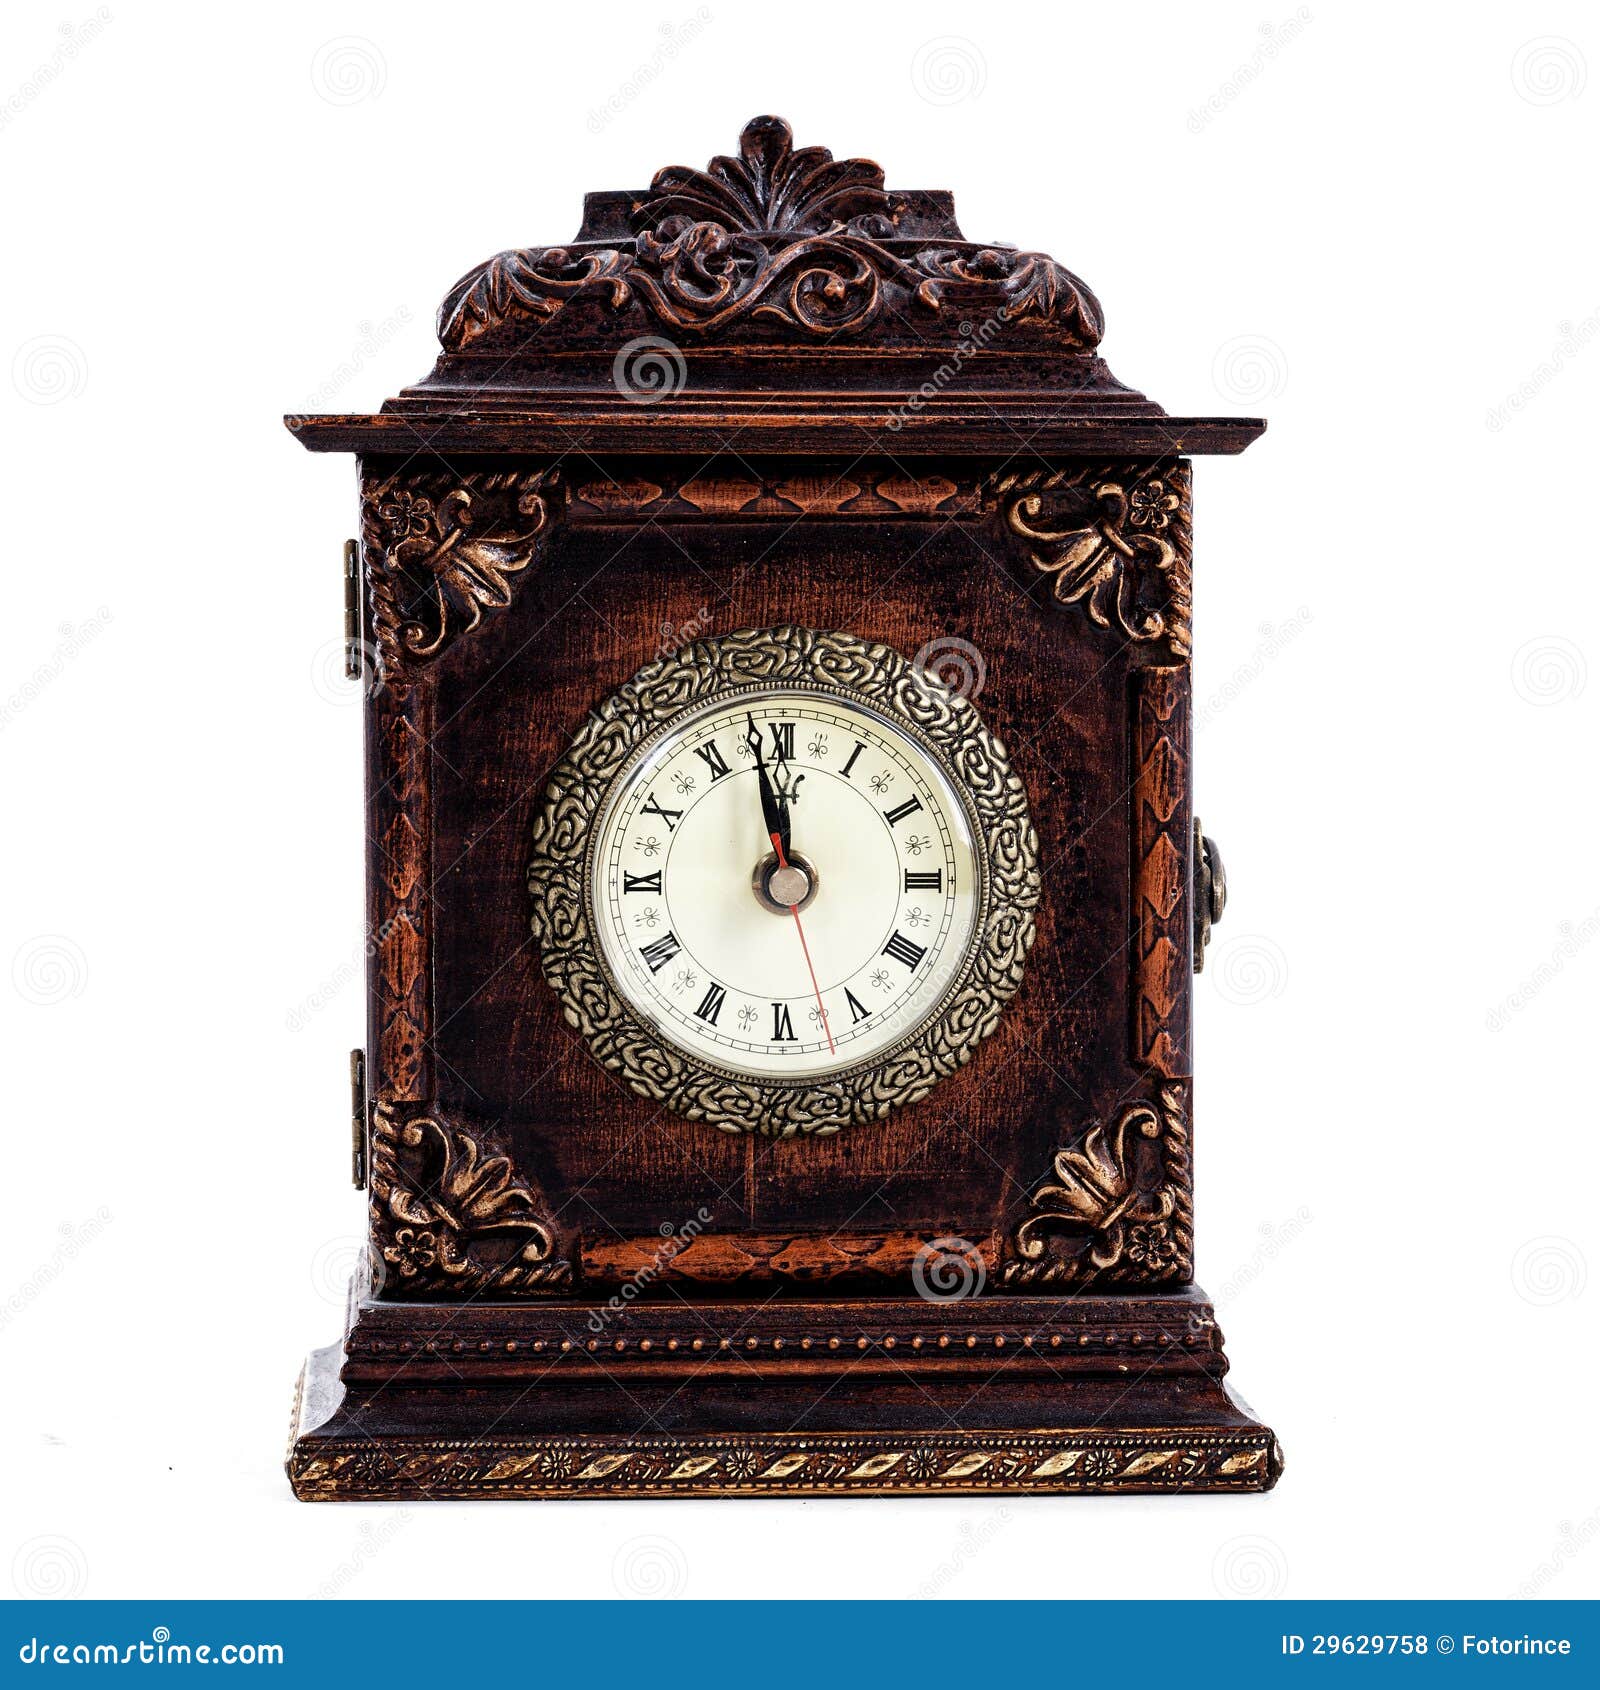 antique clock about to hit midnight or noon